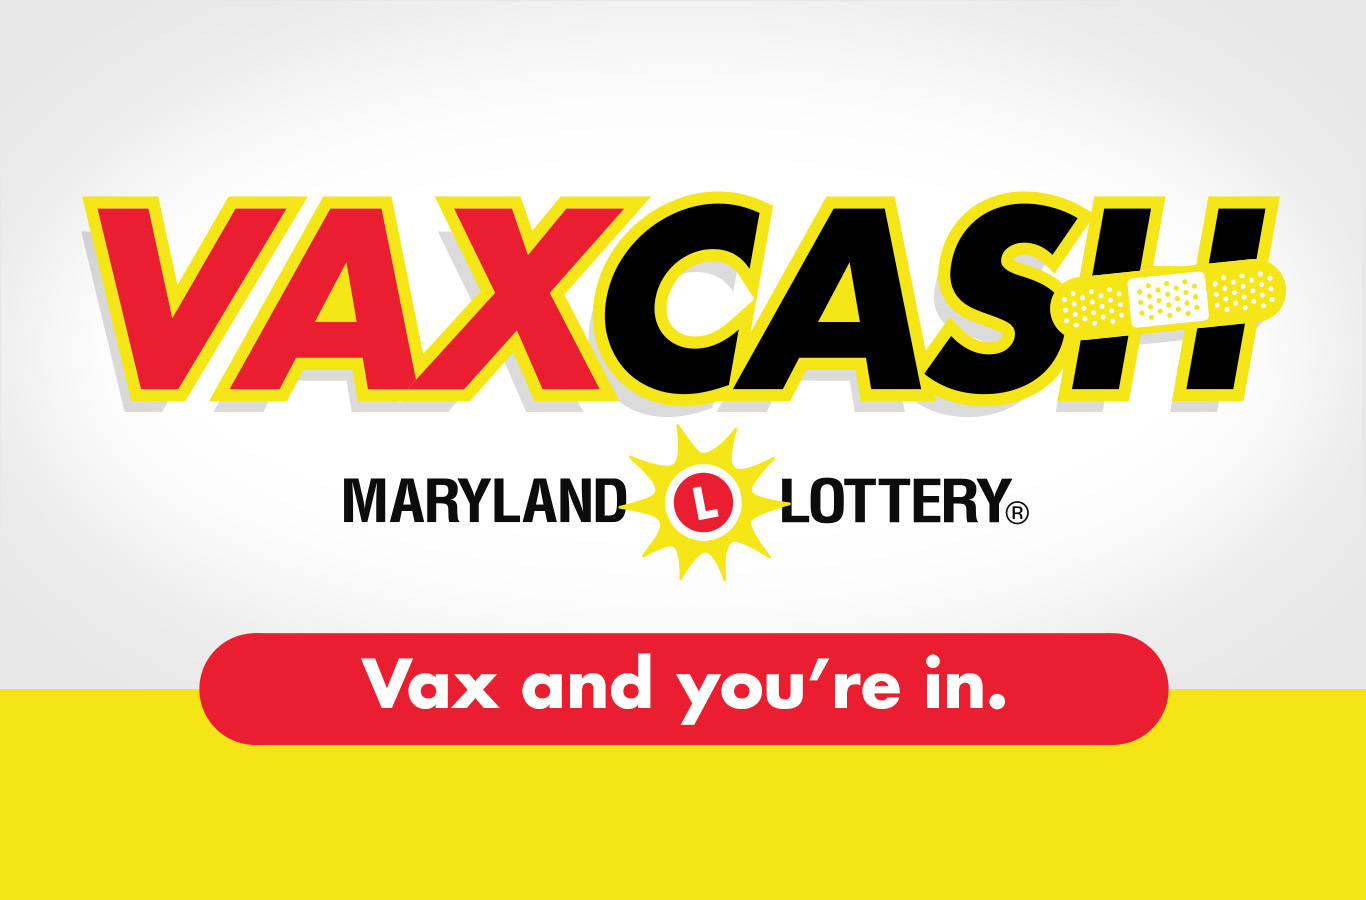 Any Maryland resident 18+ who has been vaccinated for COVID-19 in Maryland is automatically eligible for a chance to win!